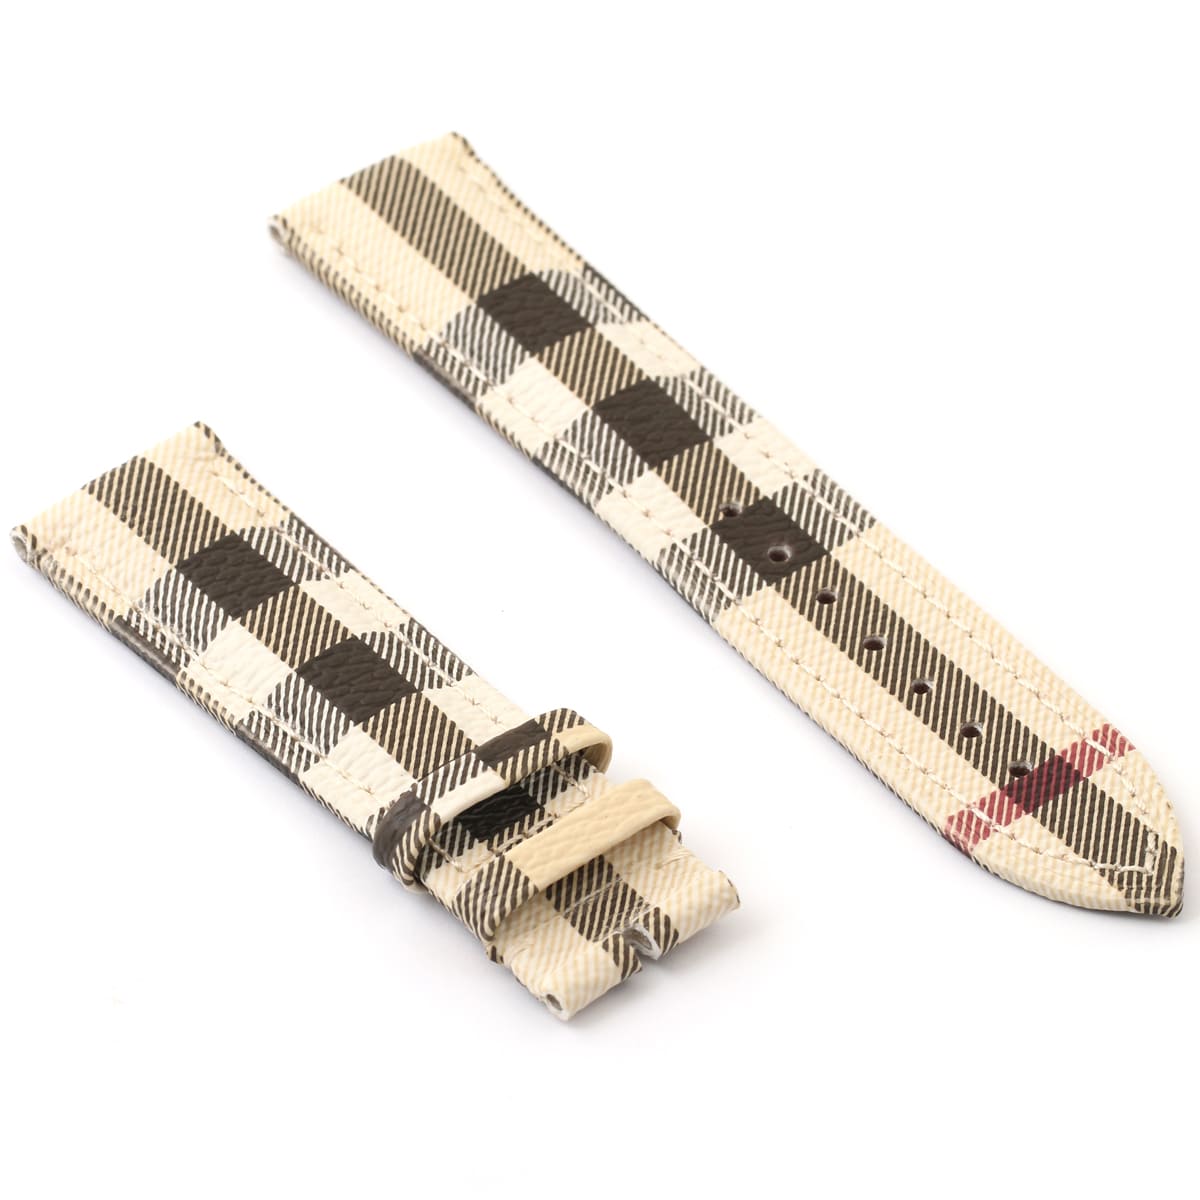 Burberry Watch Strap Multicolor Leather | Watches Prime